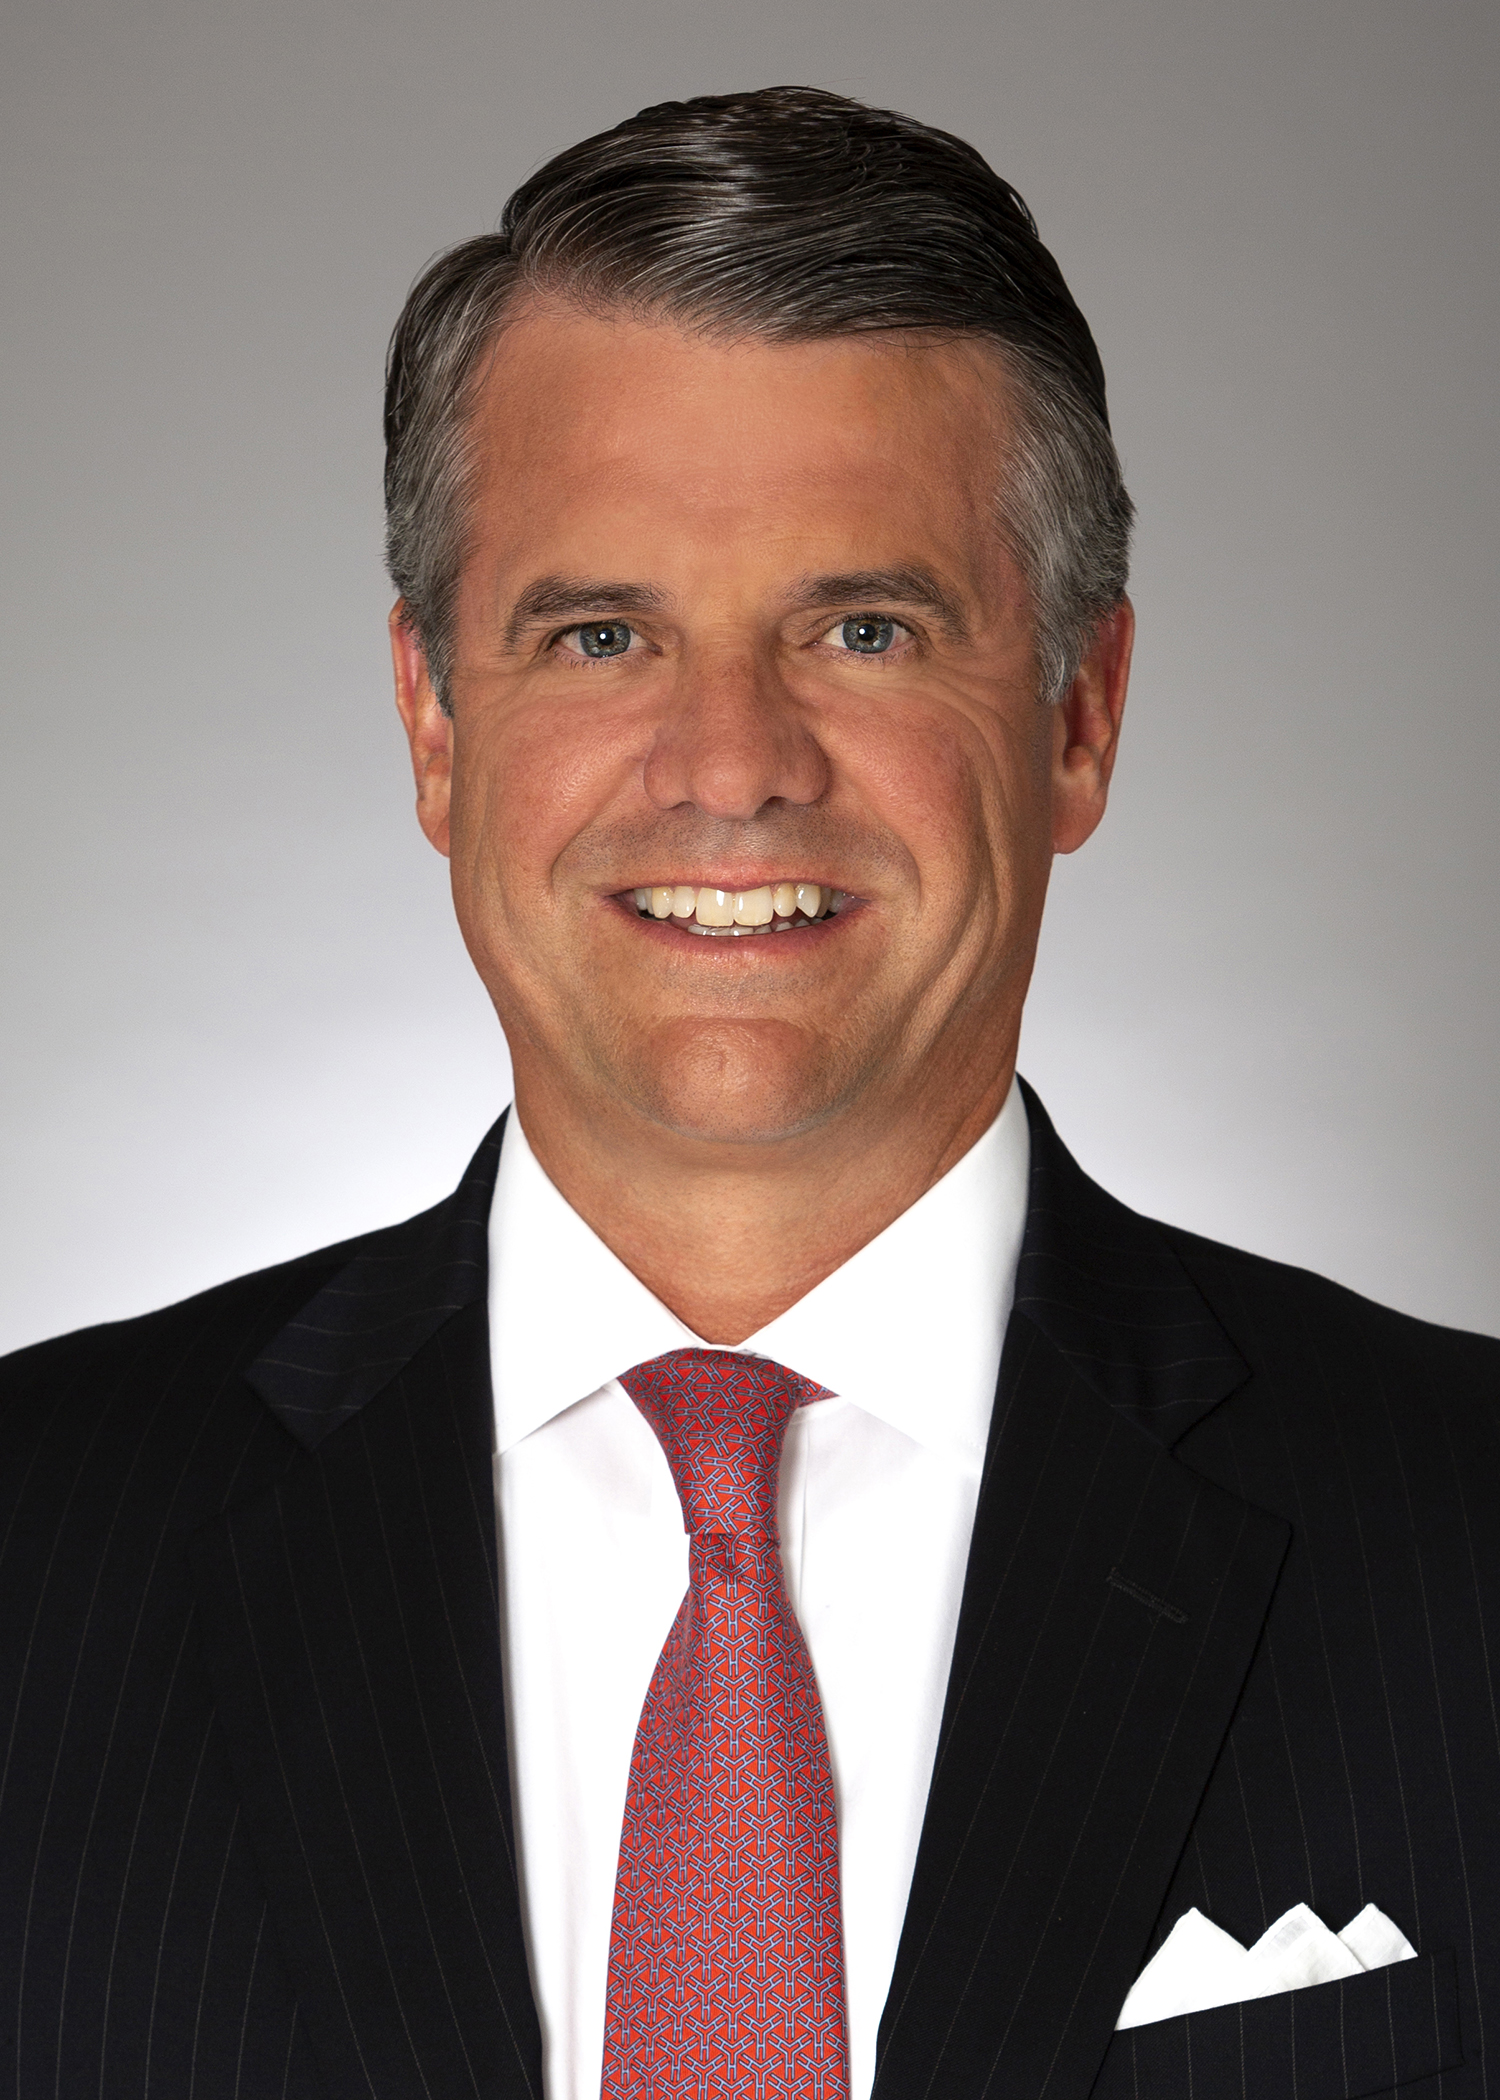 James O'Hoppe was hired as Wealth Advisory president of Wilmington Trust's Tri-State Region.